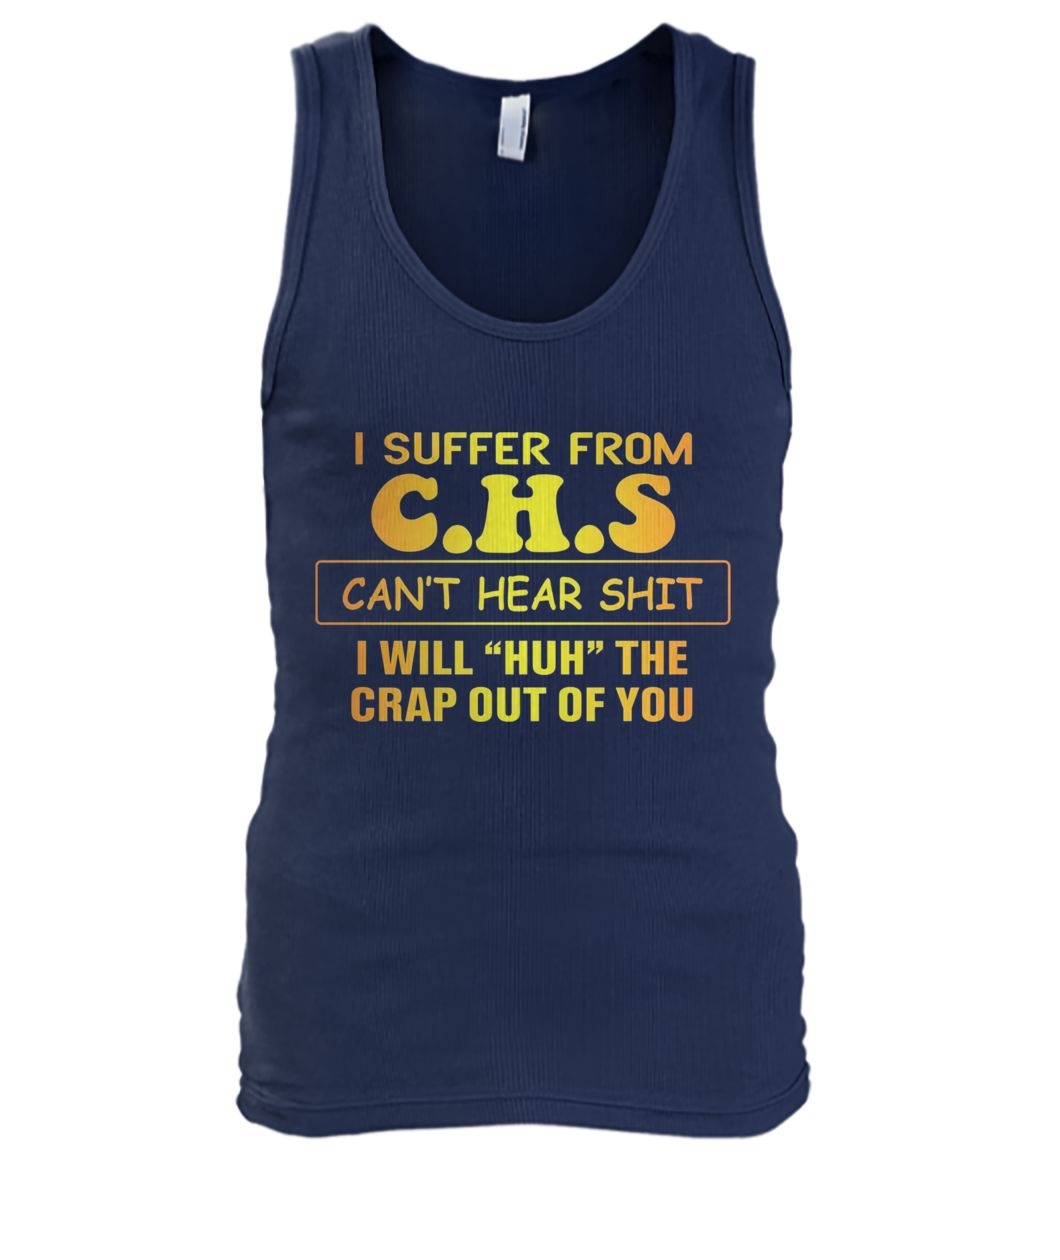 I suffer from CHS can't hear shit I will huh the crap out of you men's tank top